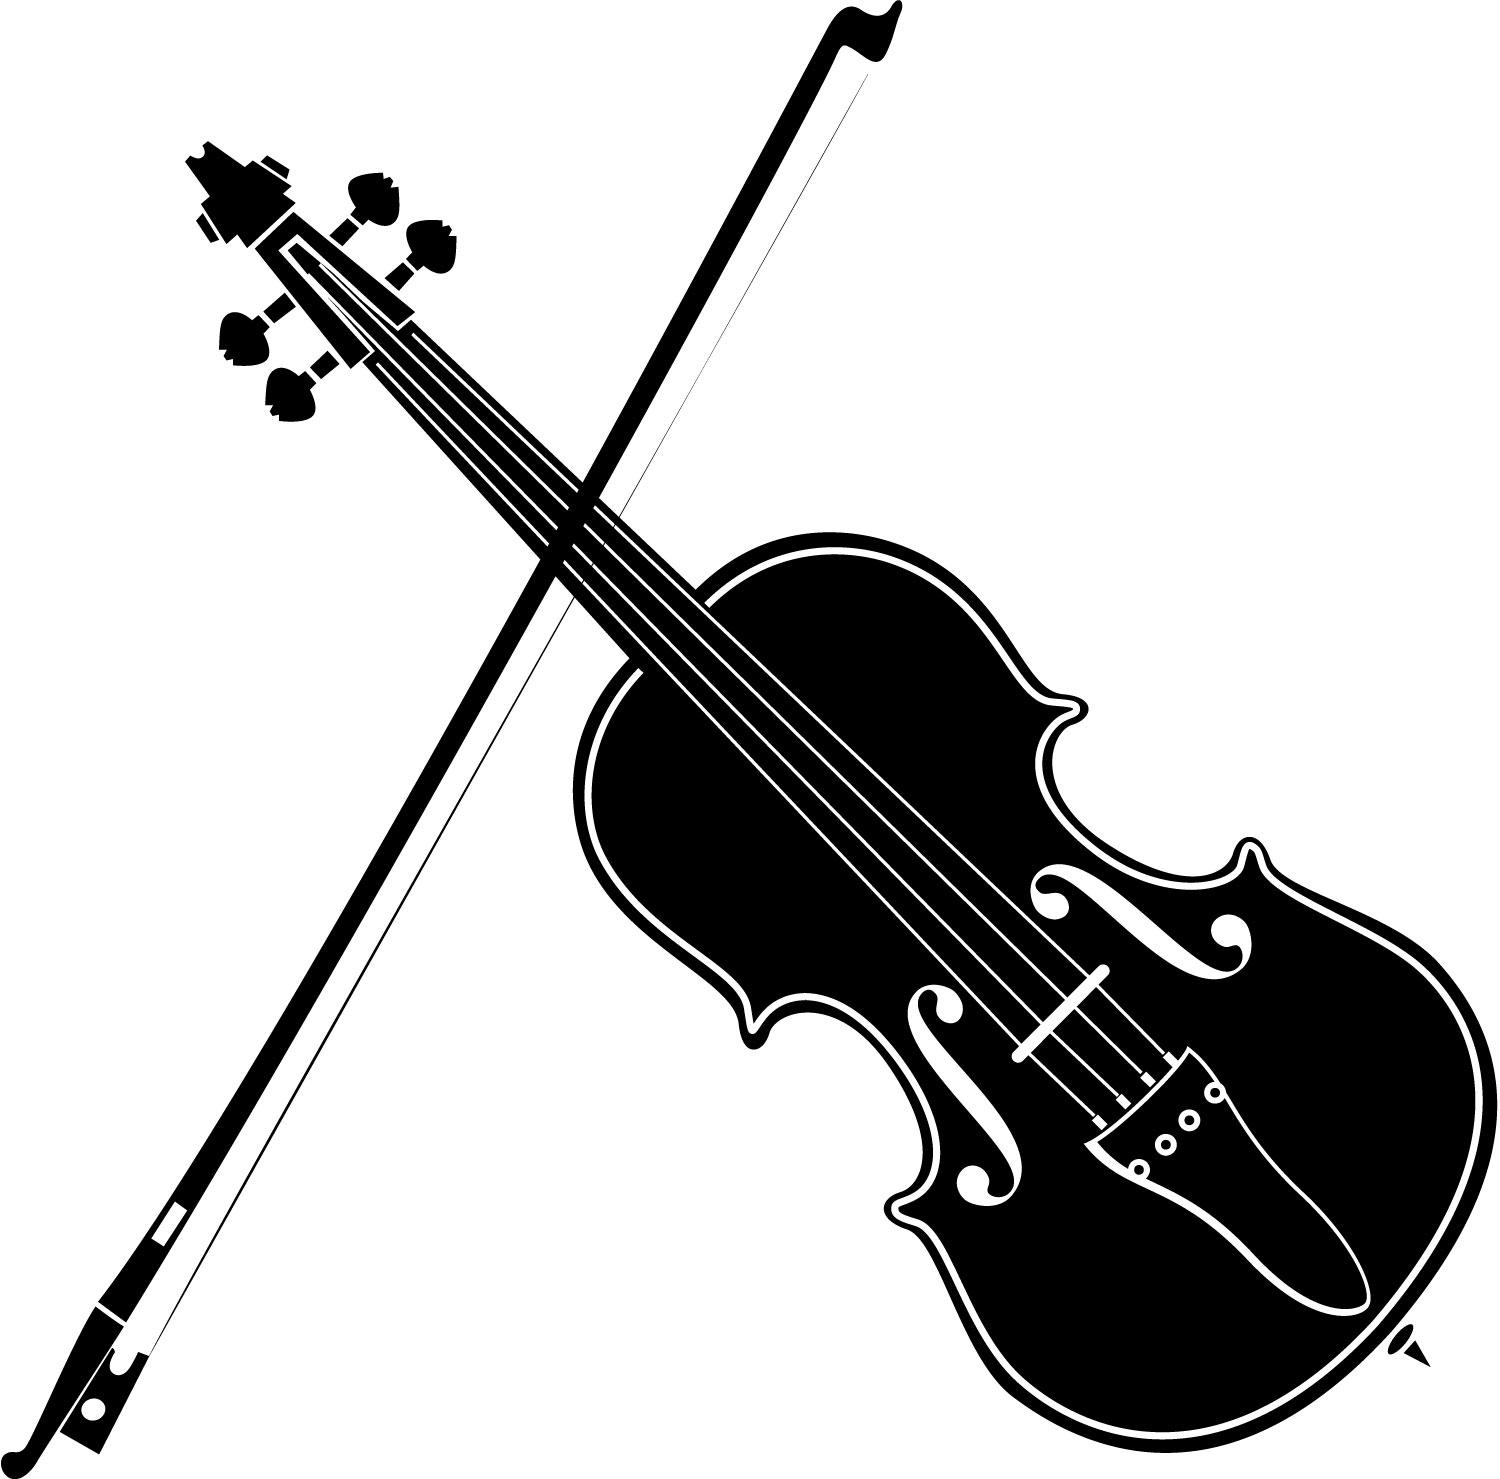 Playing Violin Clipart Black And White | Clipart Panda - Free ...